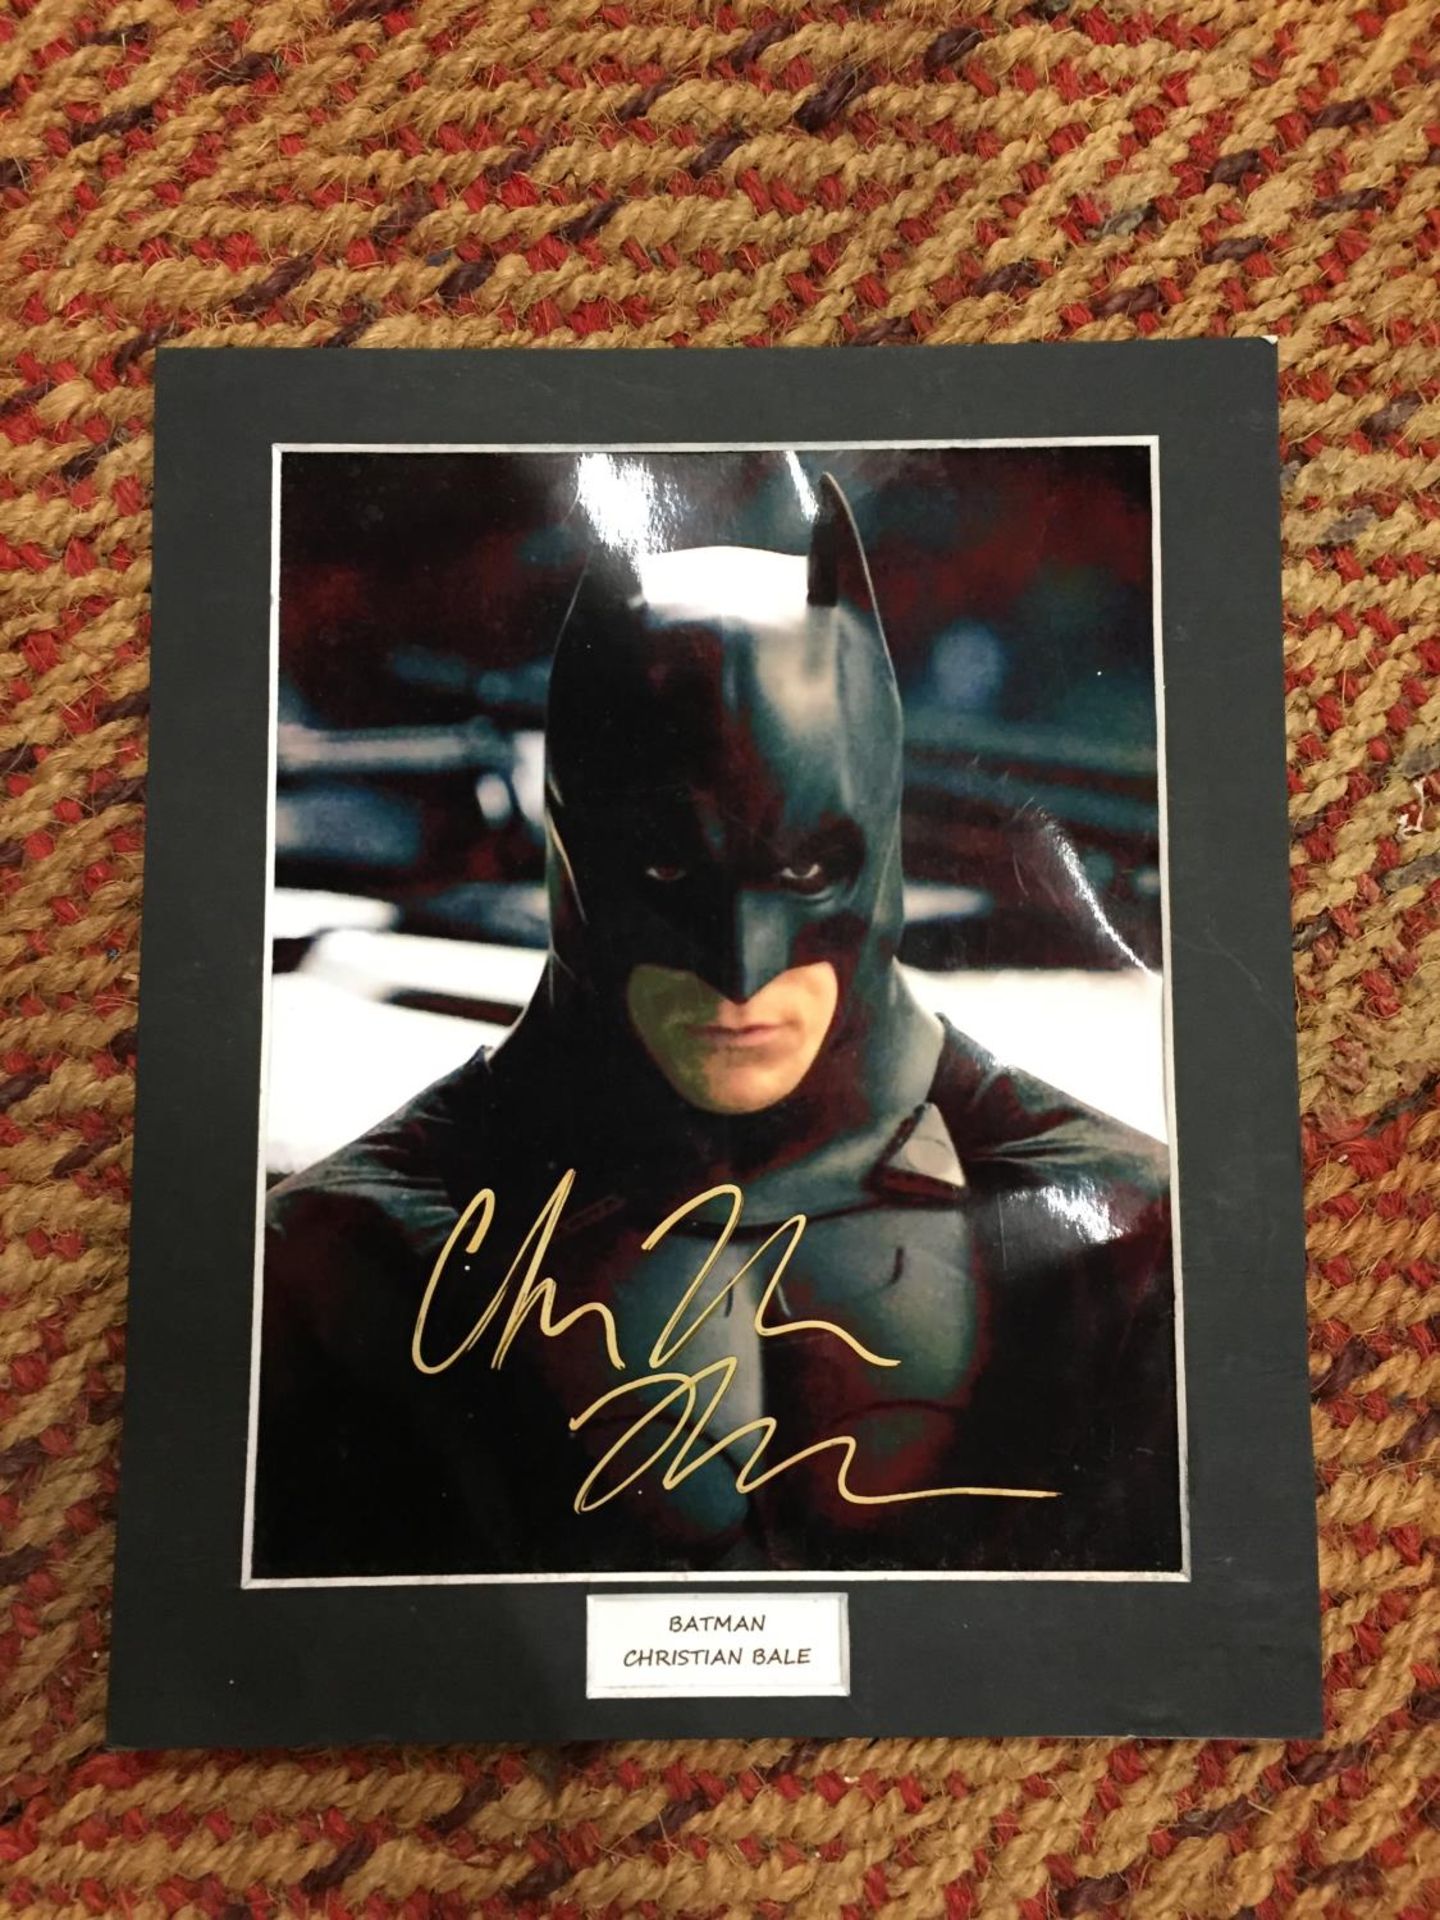 A MOUNTED SIGNED PICTURE OF CHRISTIAN BALE PLAYING BATMAN